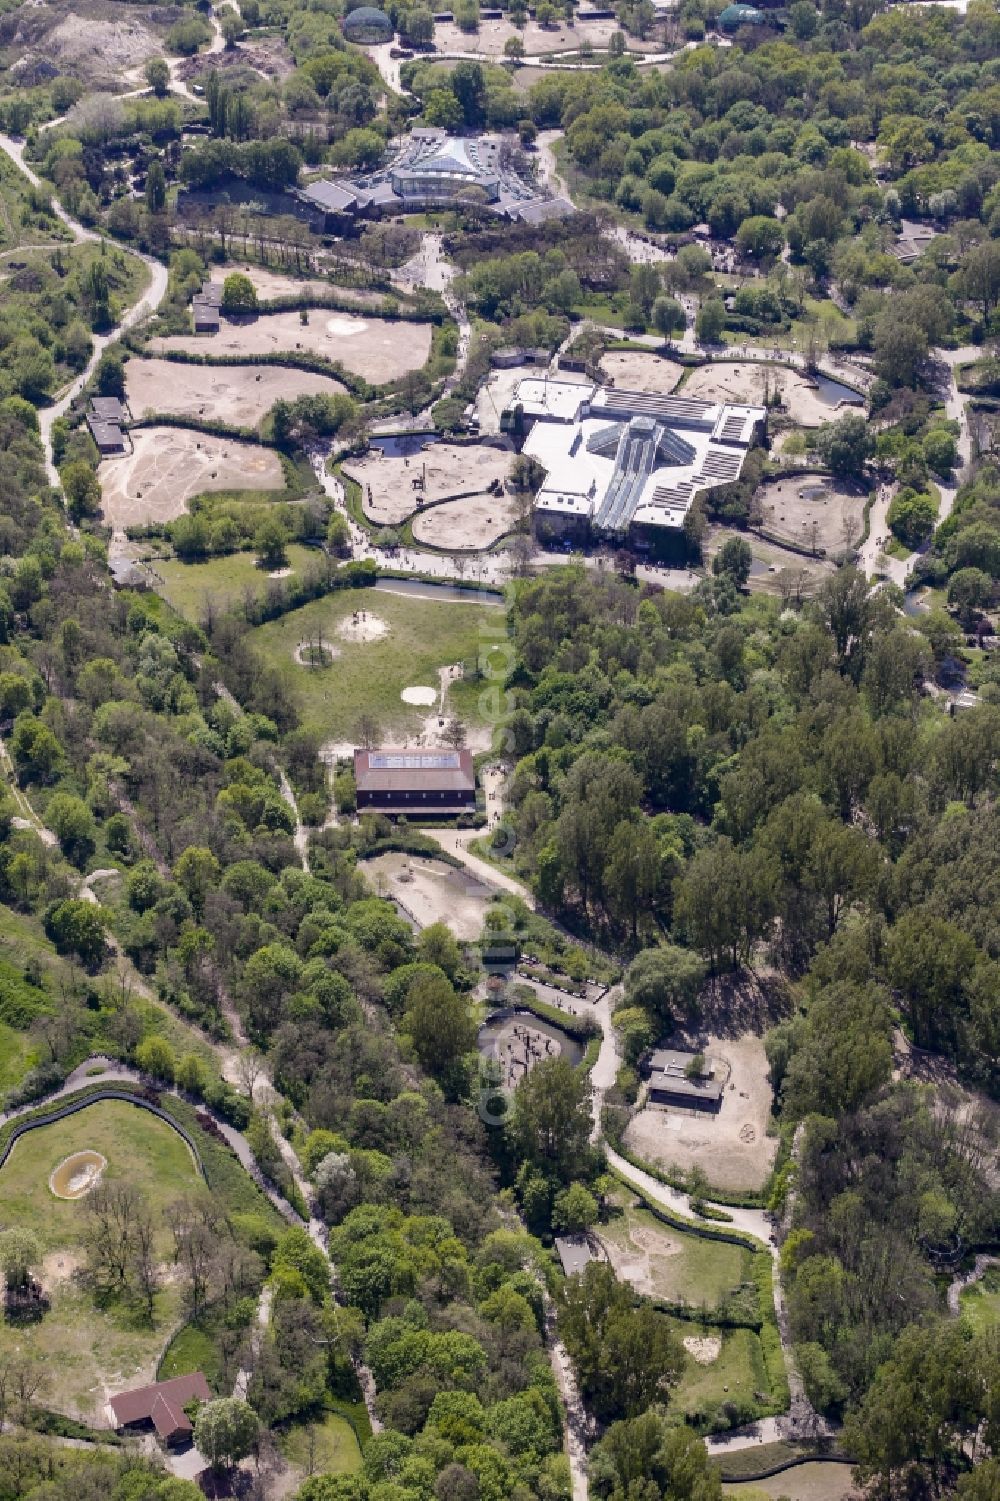 Aerial photograph Berlin - The zoo Tierpark Berlin in the Friedrichsfelde part of the district of Lichtenberg in Berlin in the state of Brandenburg. The park is the biggest landscape zoological garden in Europe. View of the Alfred Brehm House